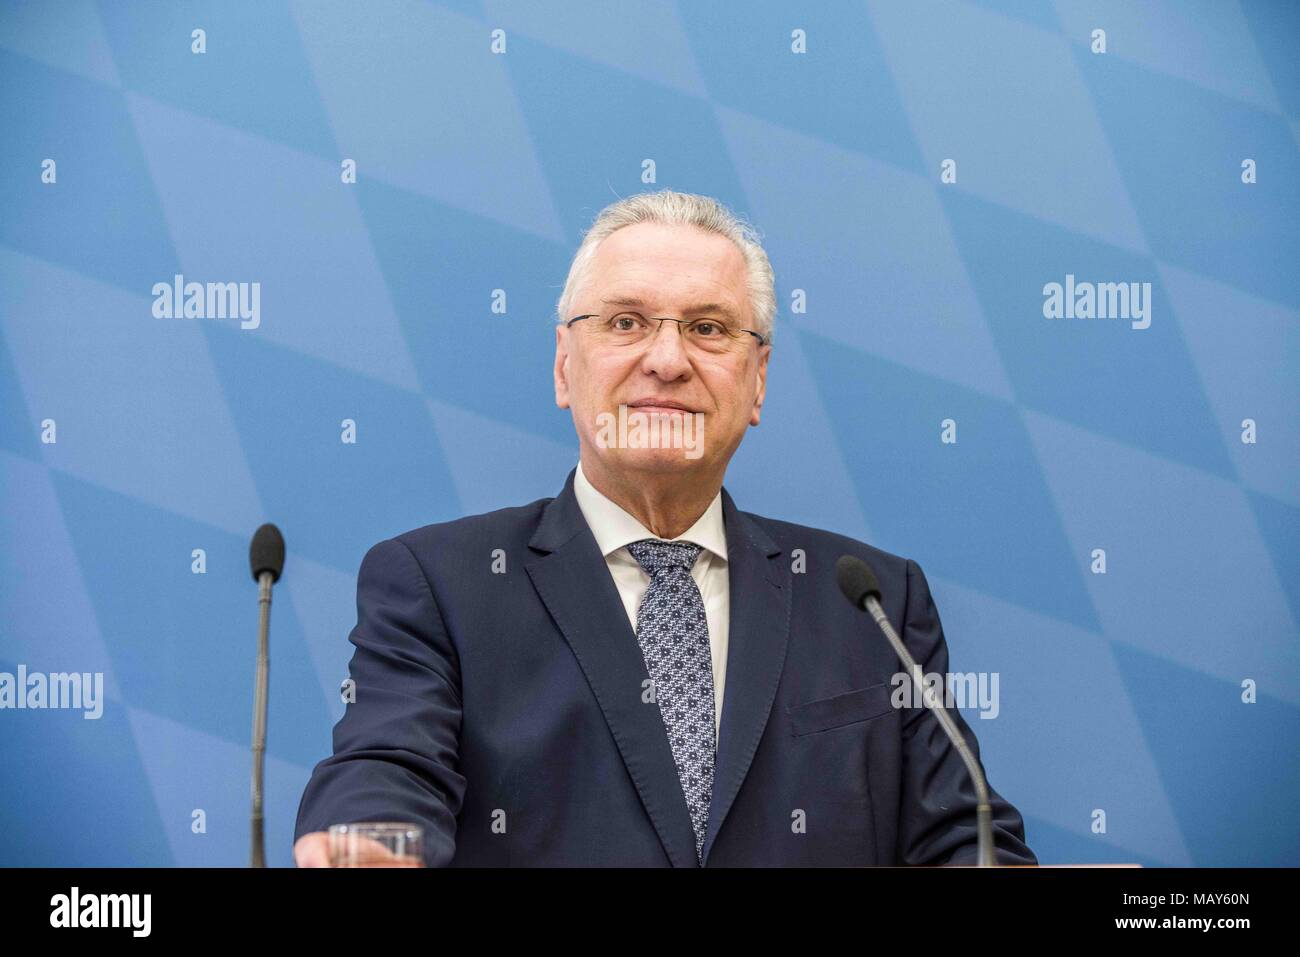 Munich, Bavaria, Germany. 5th Apr, 2018. Joachim Herrmann, Interior Minister of Bavaria. The 2017-2018 edition of the Bavarian Verfassungsschutzbericht (Office for the Protection of the Constitution, Secret Service) report was released detailing threats to the state of Bavaria, including right- and left-extremism, Islamists, as well as Cyber Warfare and Espionage. The report introduced by Bavarian Innenminister Joachim Herrmann (CSU) and Dr. Burkhard KÃƒÂ¶rner, as well as .In recent years, Bavaria has seen a sharp rise in what is known as PMK-Rechts (politically motivated crimes- right wing Stock Photo